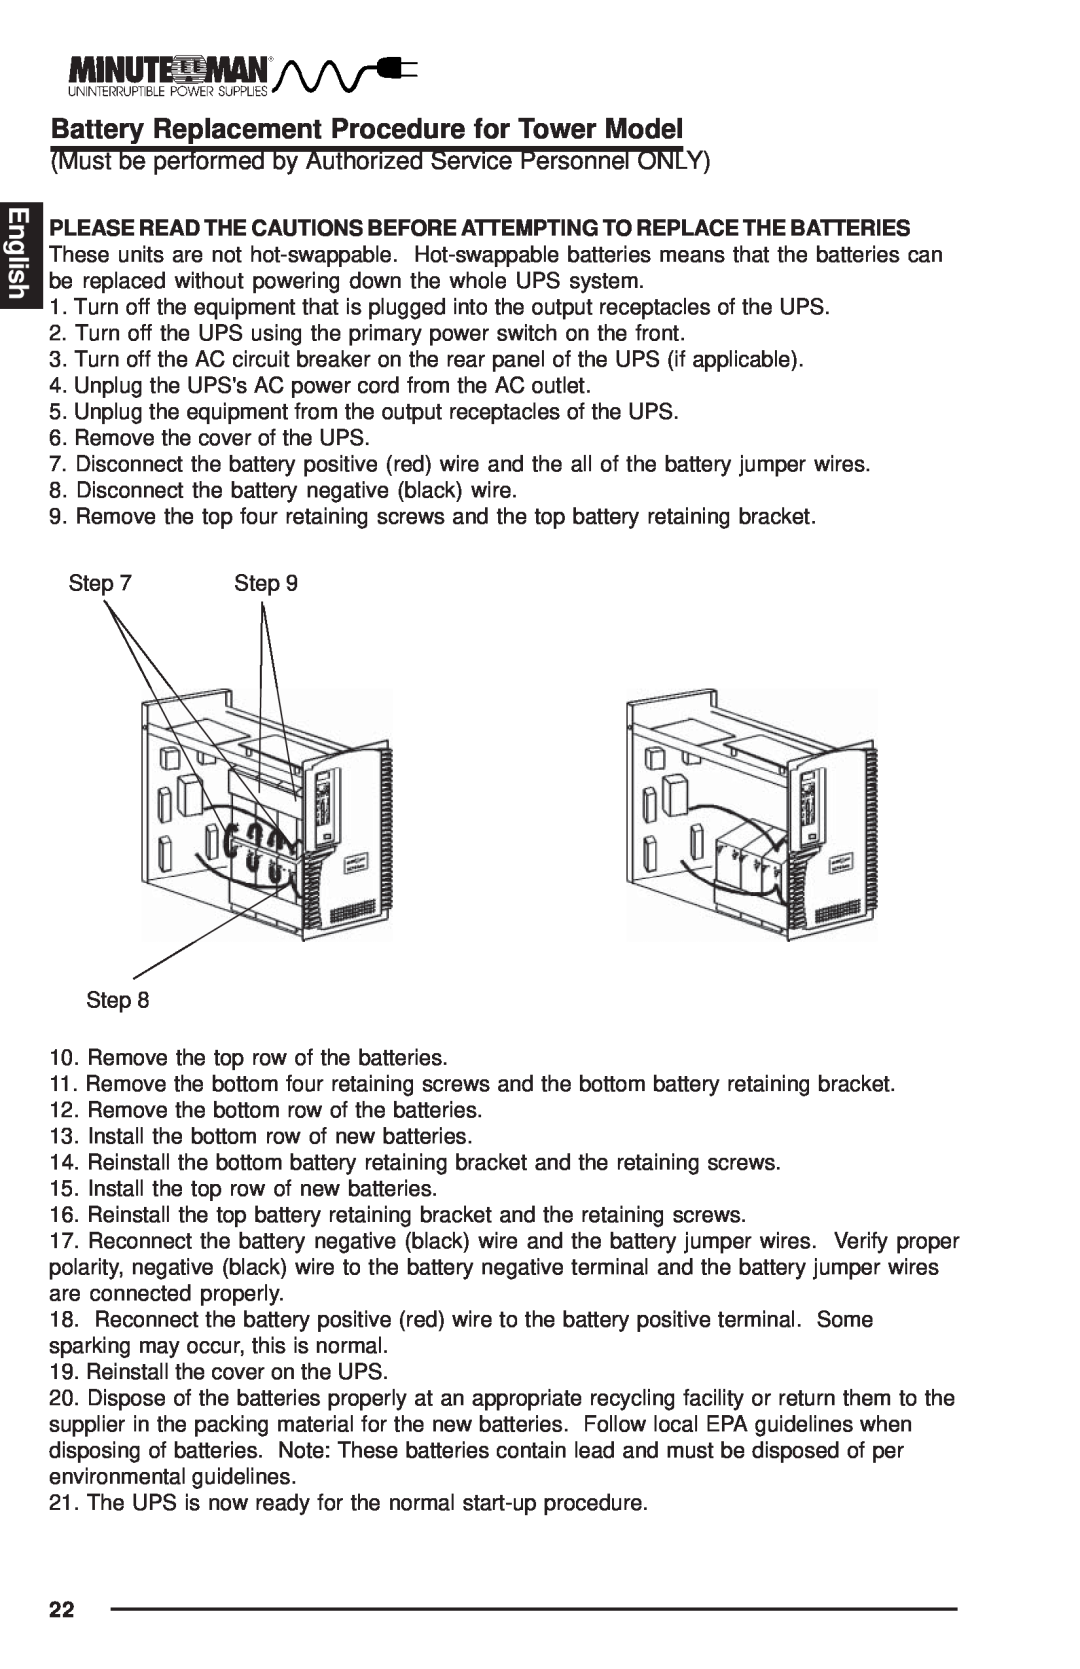 Minuteman UPS MCP-E user manual English, Battery Replacement Procedure for Tower Model 